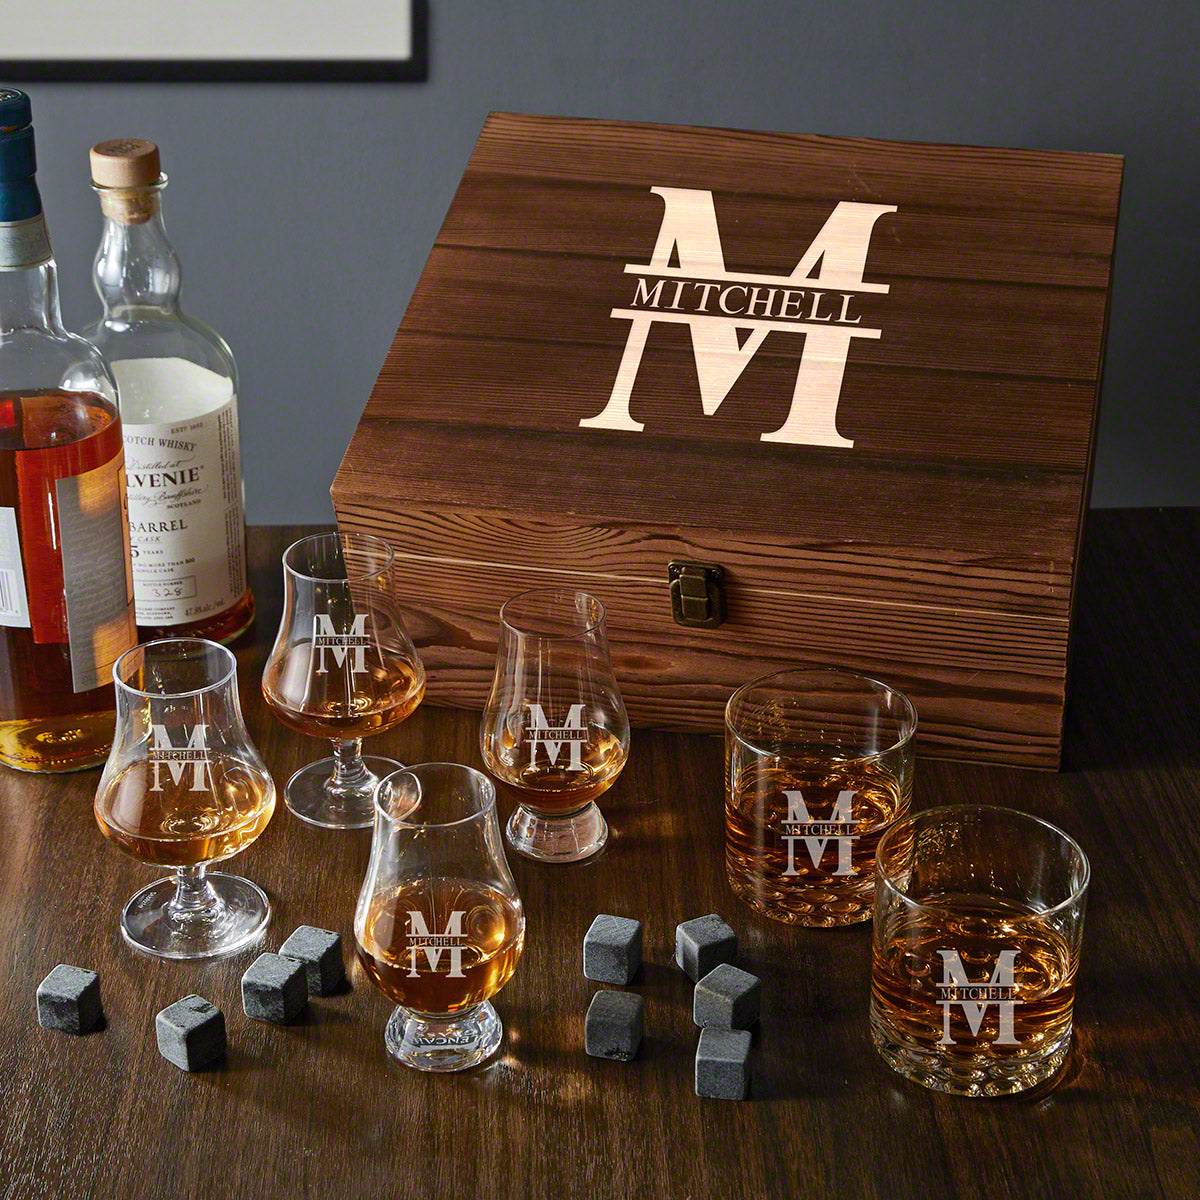 Ultimate Personalized Whiskey Tasting Set - 8pc Gift Boxed Set with Glencairn, Rocks & Nosing Glasses